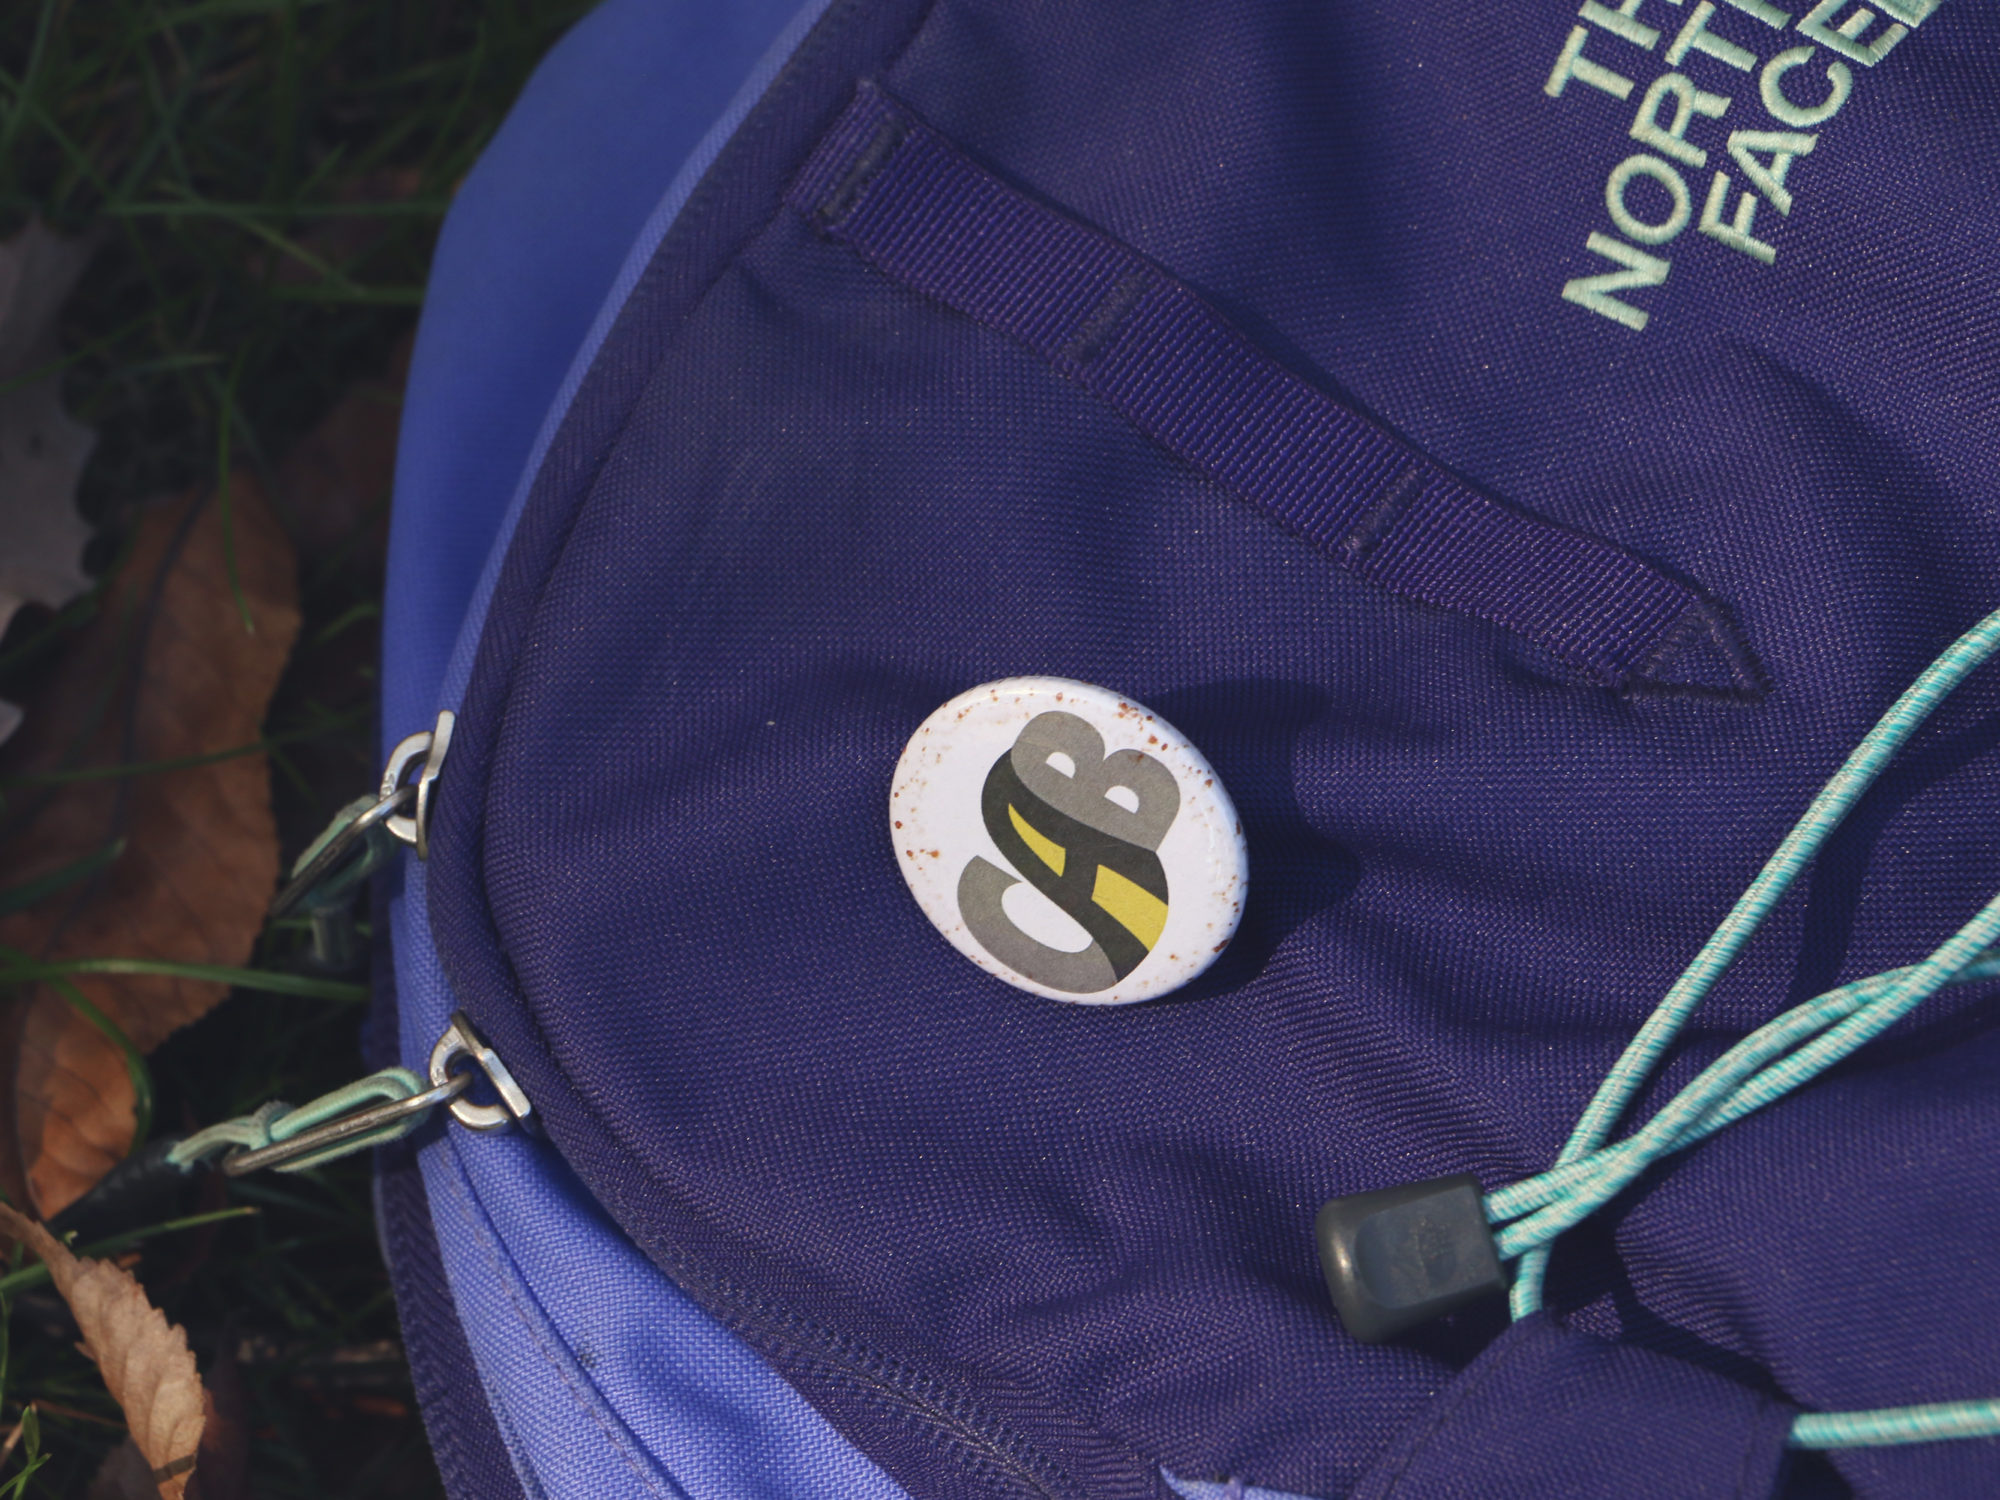 detail view of backpack showing CAB pin